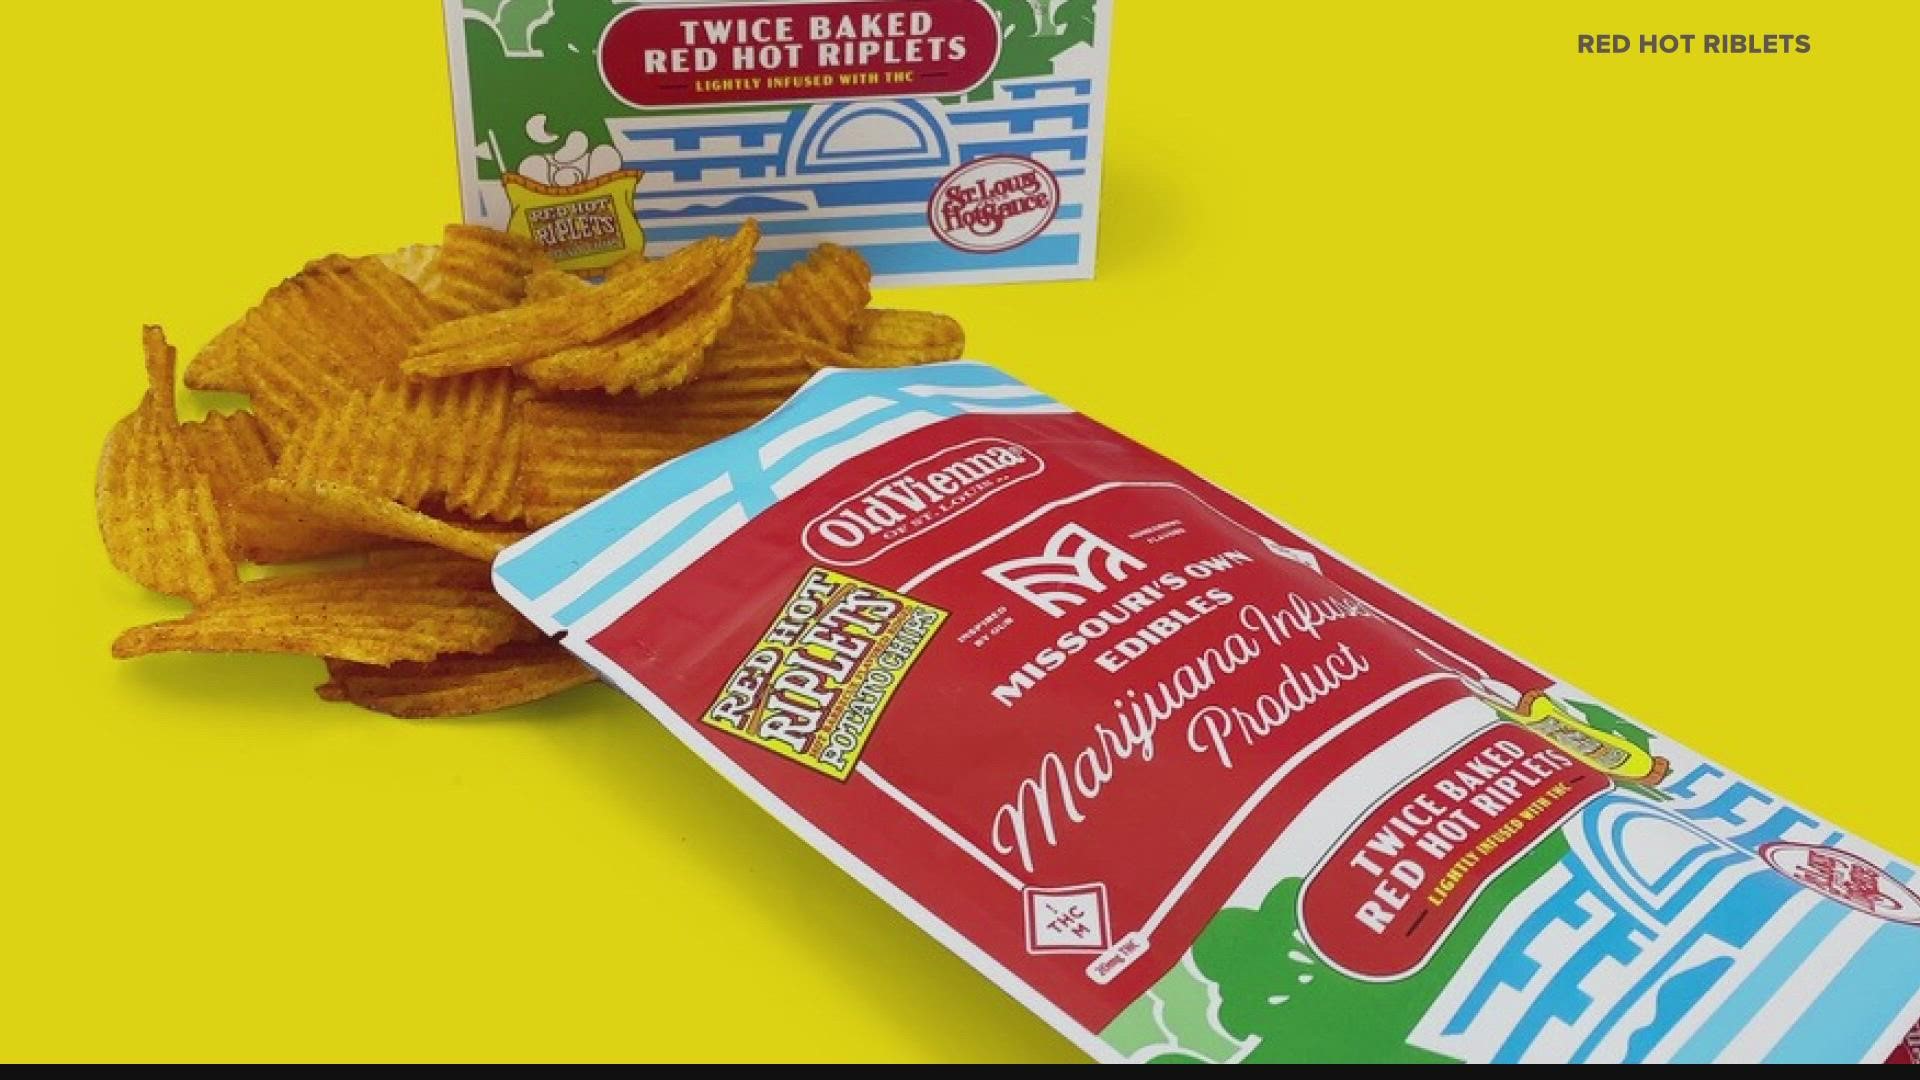 St. Louis’ favorite chip will soon be sold in Missouri dispensaries. Red Hot Riplets has created a THC-infused chip.